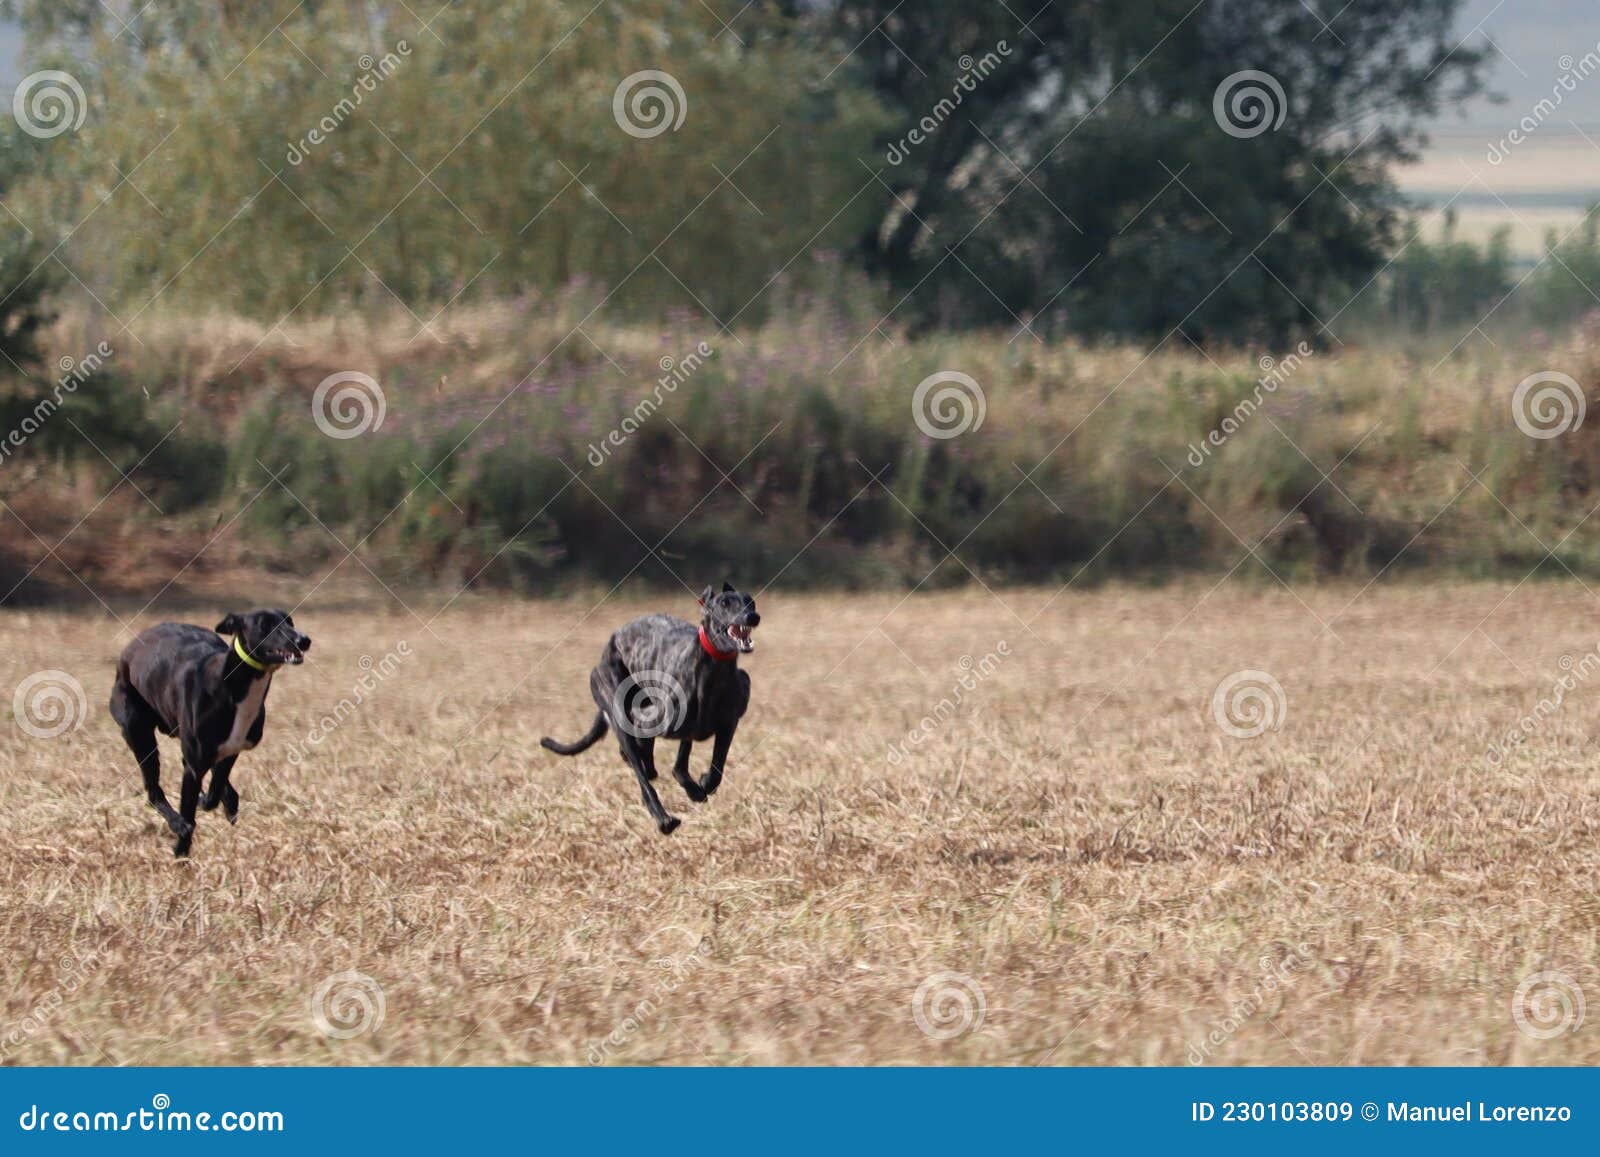 spanish greyhound dog race hare hunting speed delivers passion